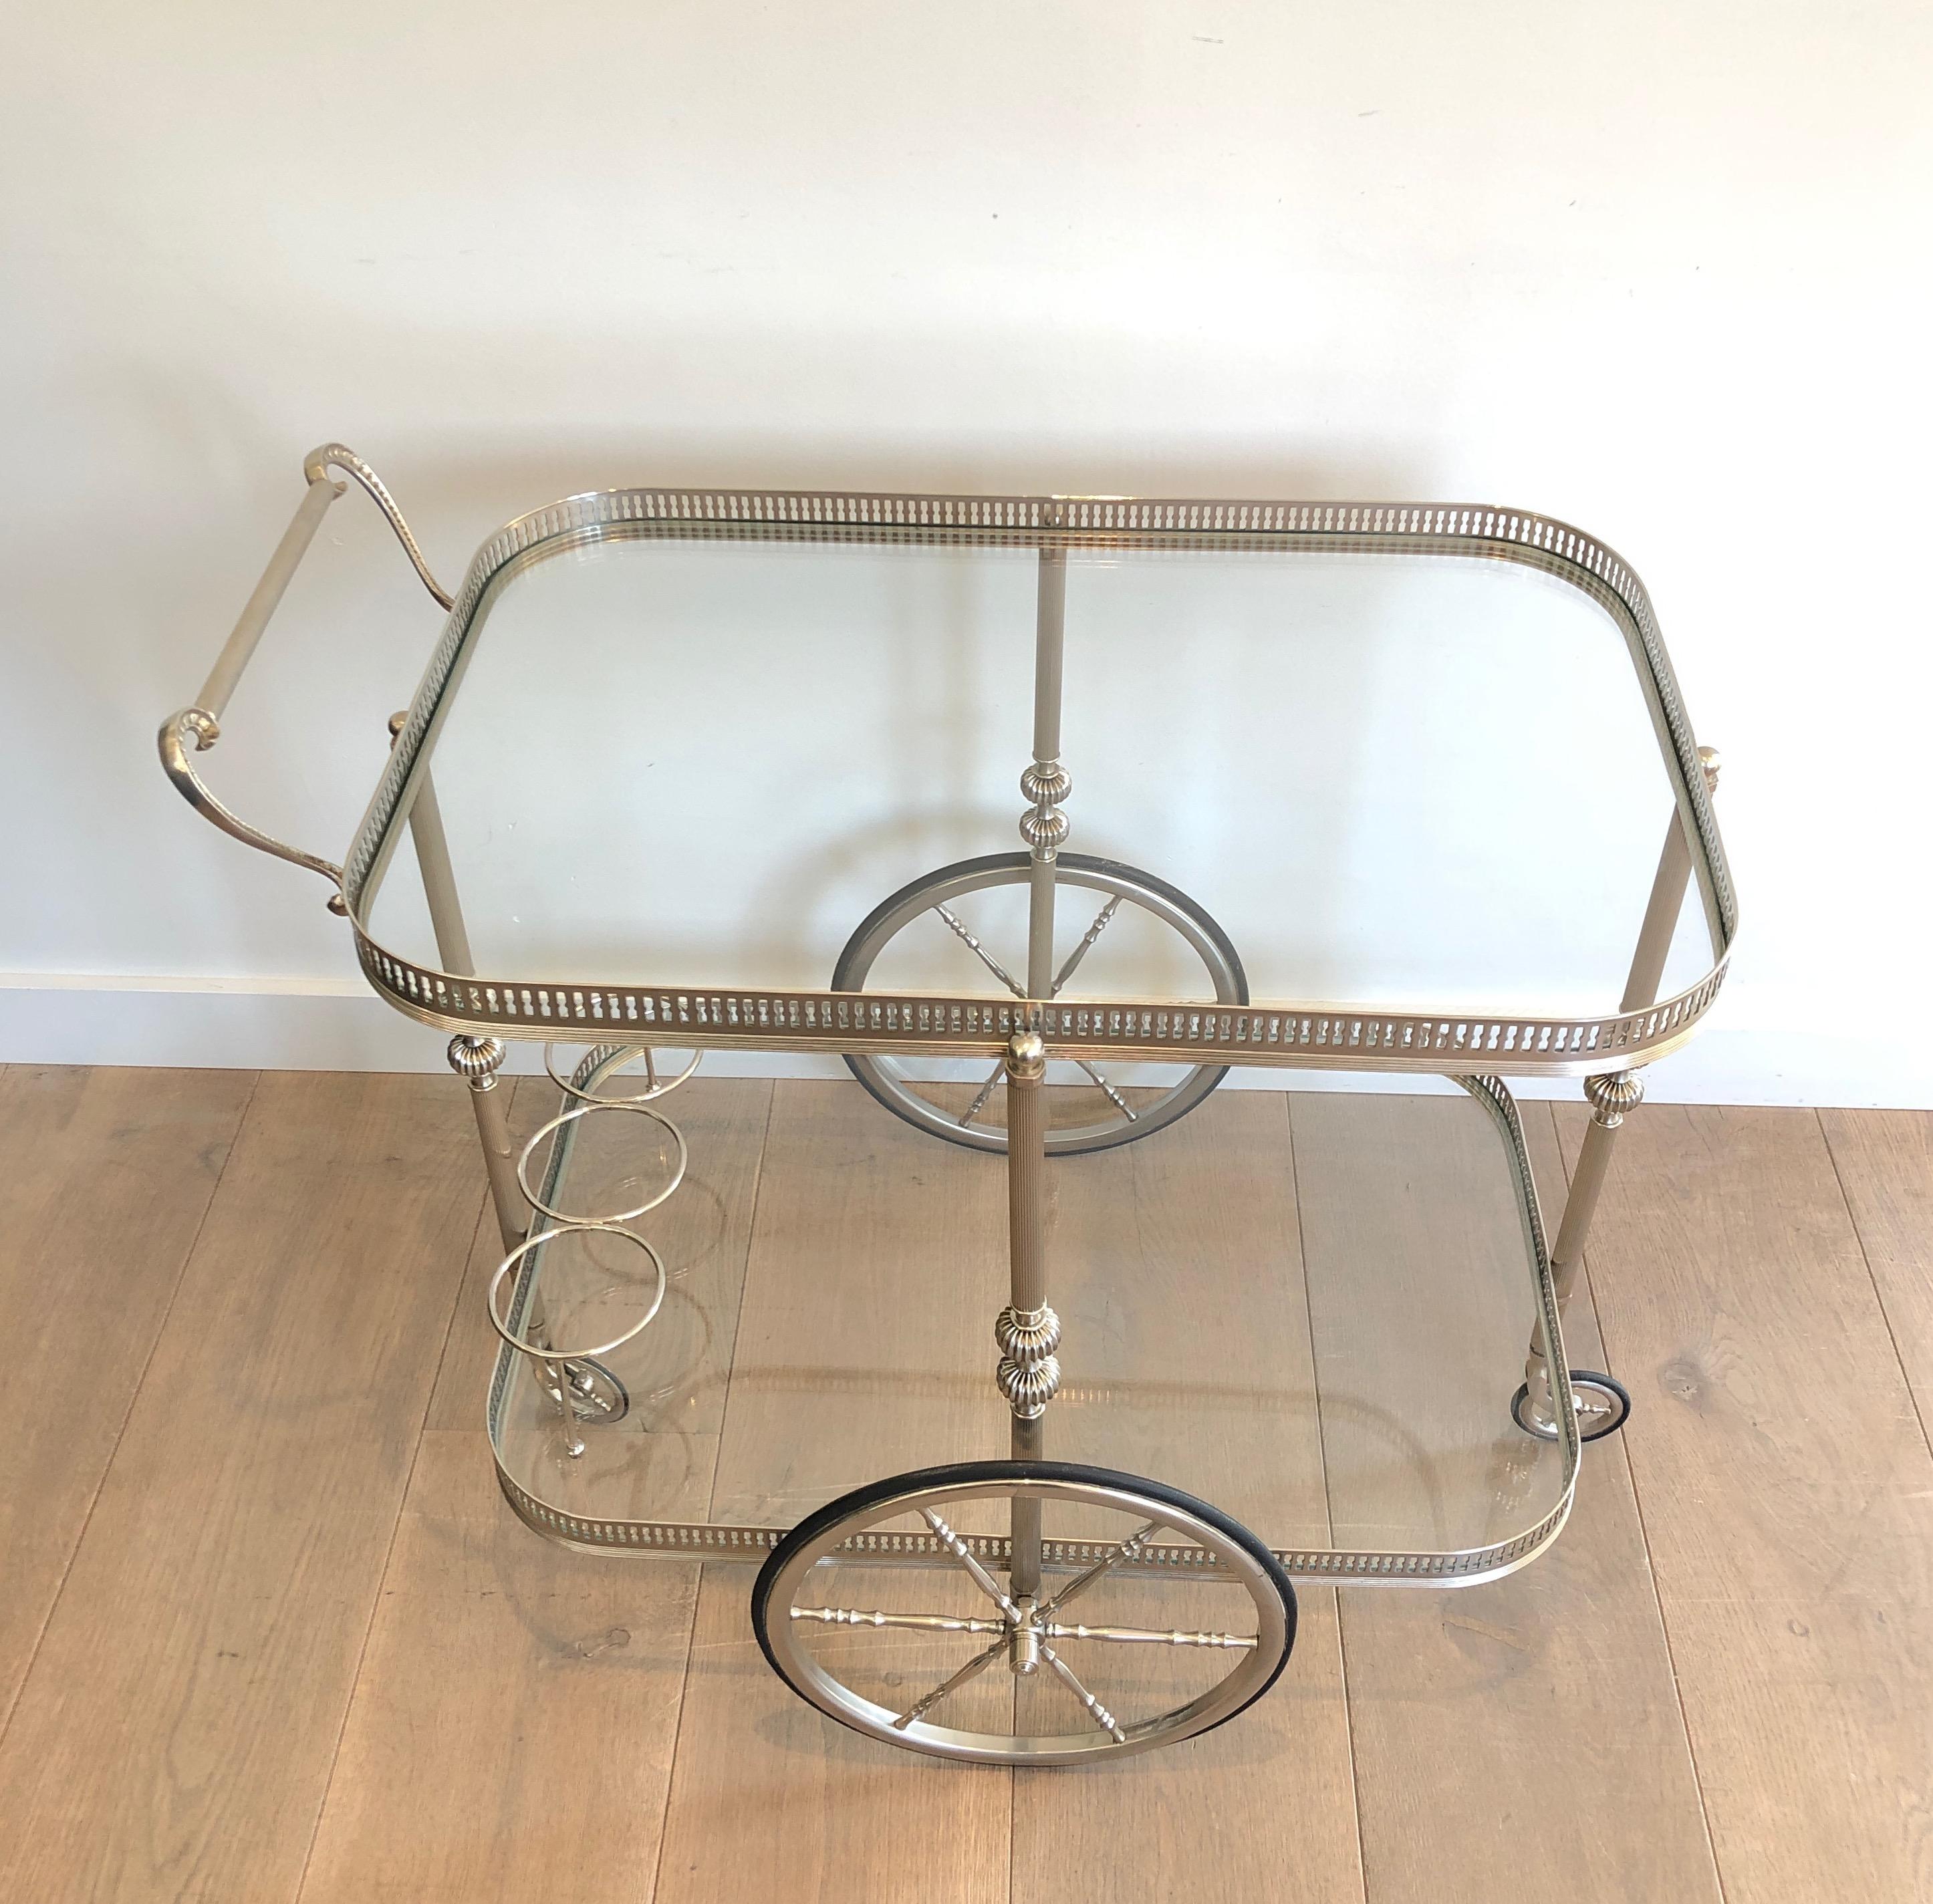 This neoclassical style bar cart is all made of silvered brass. This is a French work, in the style of Maison Jansen, circa 1940.